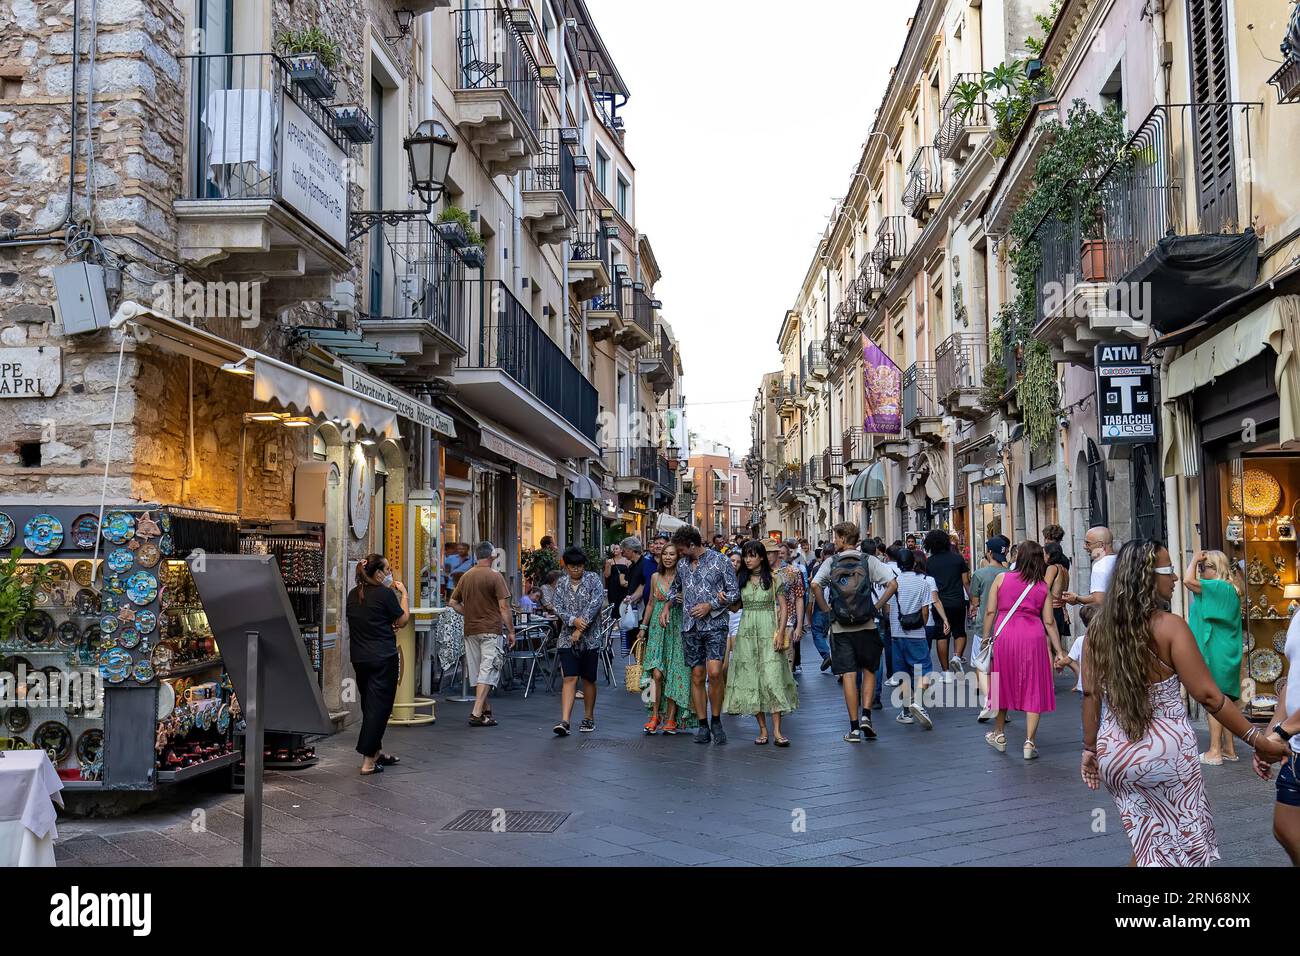 Giardini Naxos Sicily Italy  08.07.2022 - Tourists walking in the afternoon on an alley full of people and shops Stock Photo